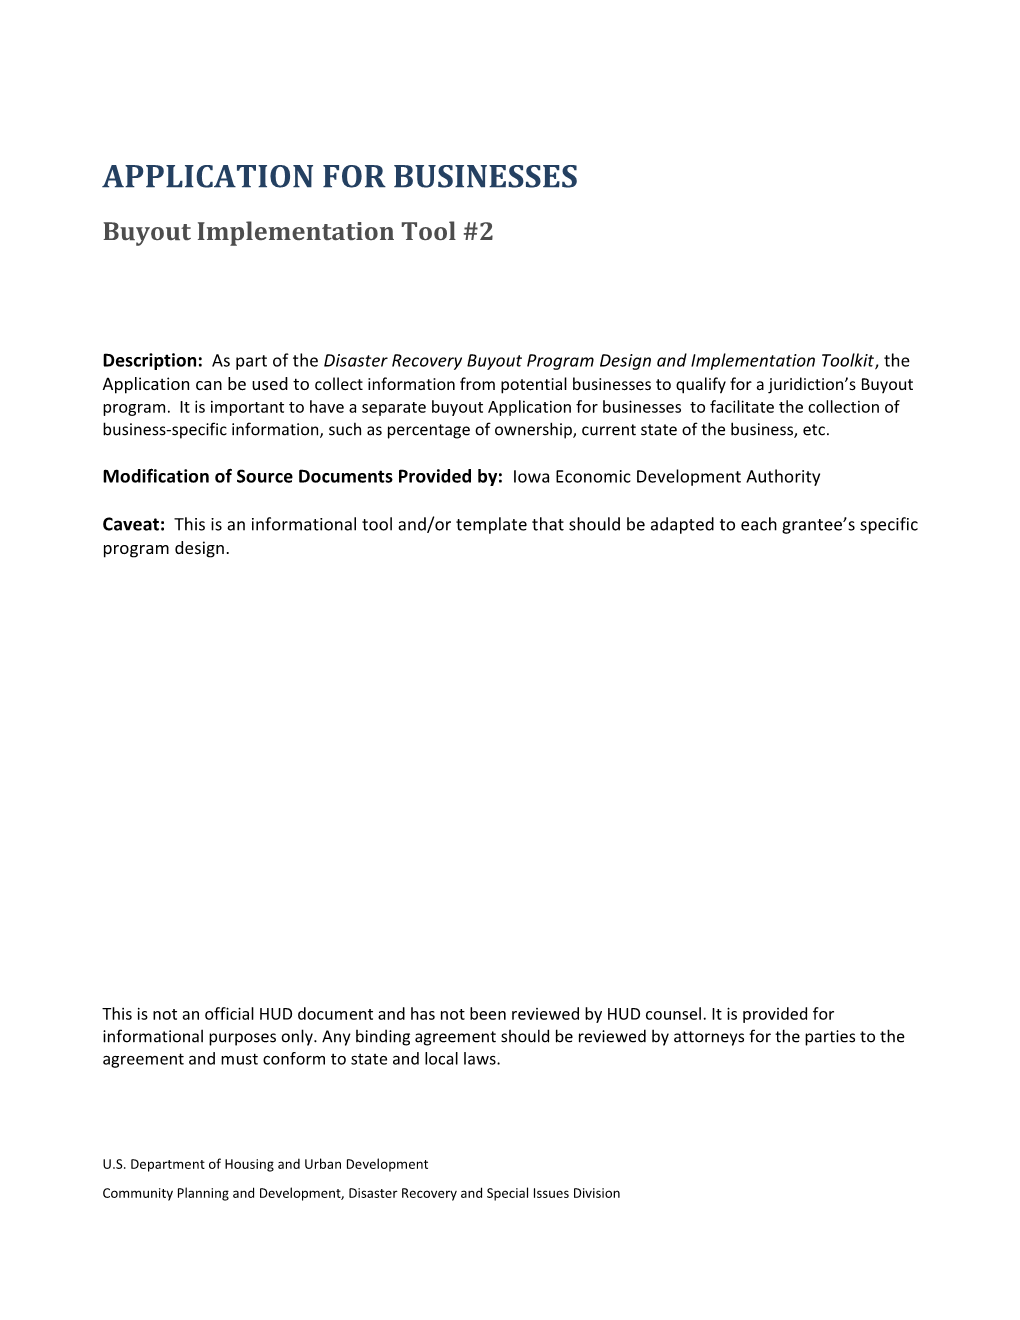 CDBG-DR Buyout Application For Businesses